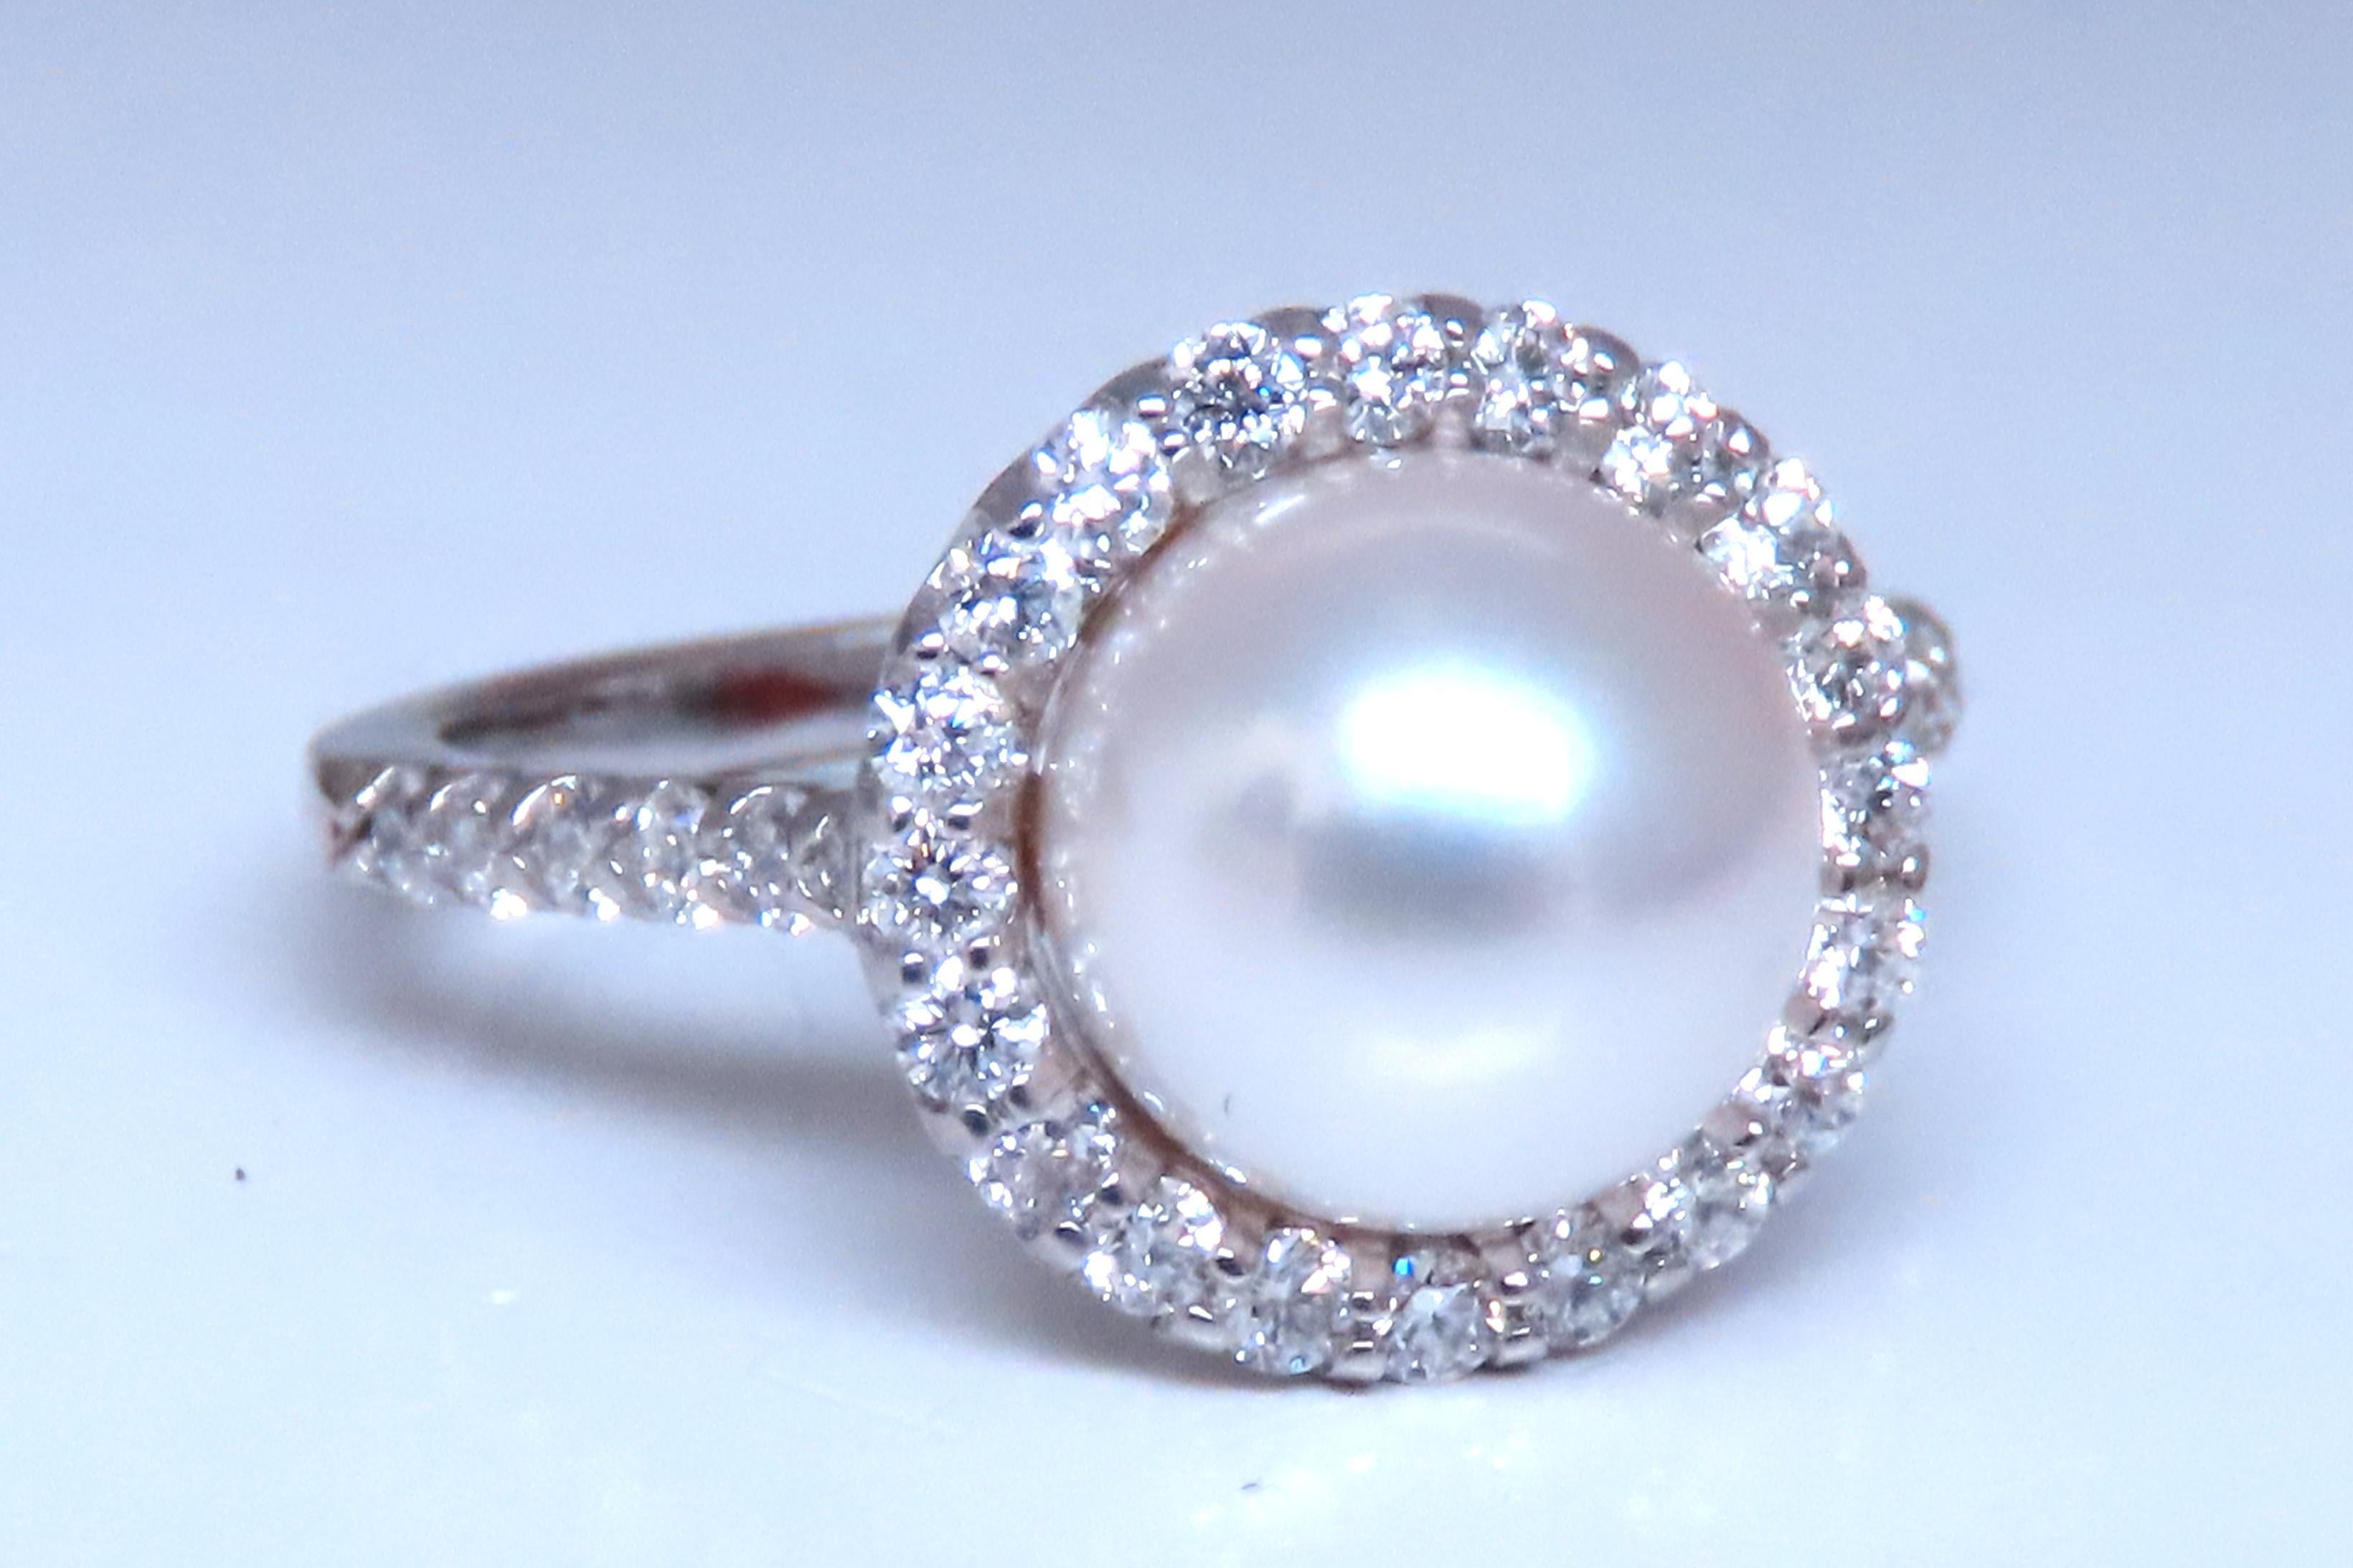 Natural Diamonds Pearl Ring
9mm South Sea White pearl
.76ct Diamonds
G-color Vs-2 clarity
14kt white gold
4.7 grams
12mm wide
10mm depth
Size 7
$4000 Appraisal to accompany